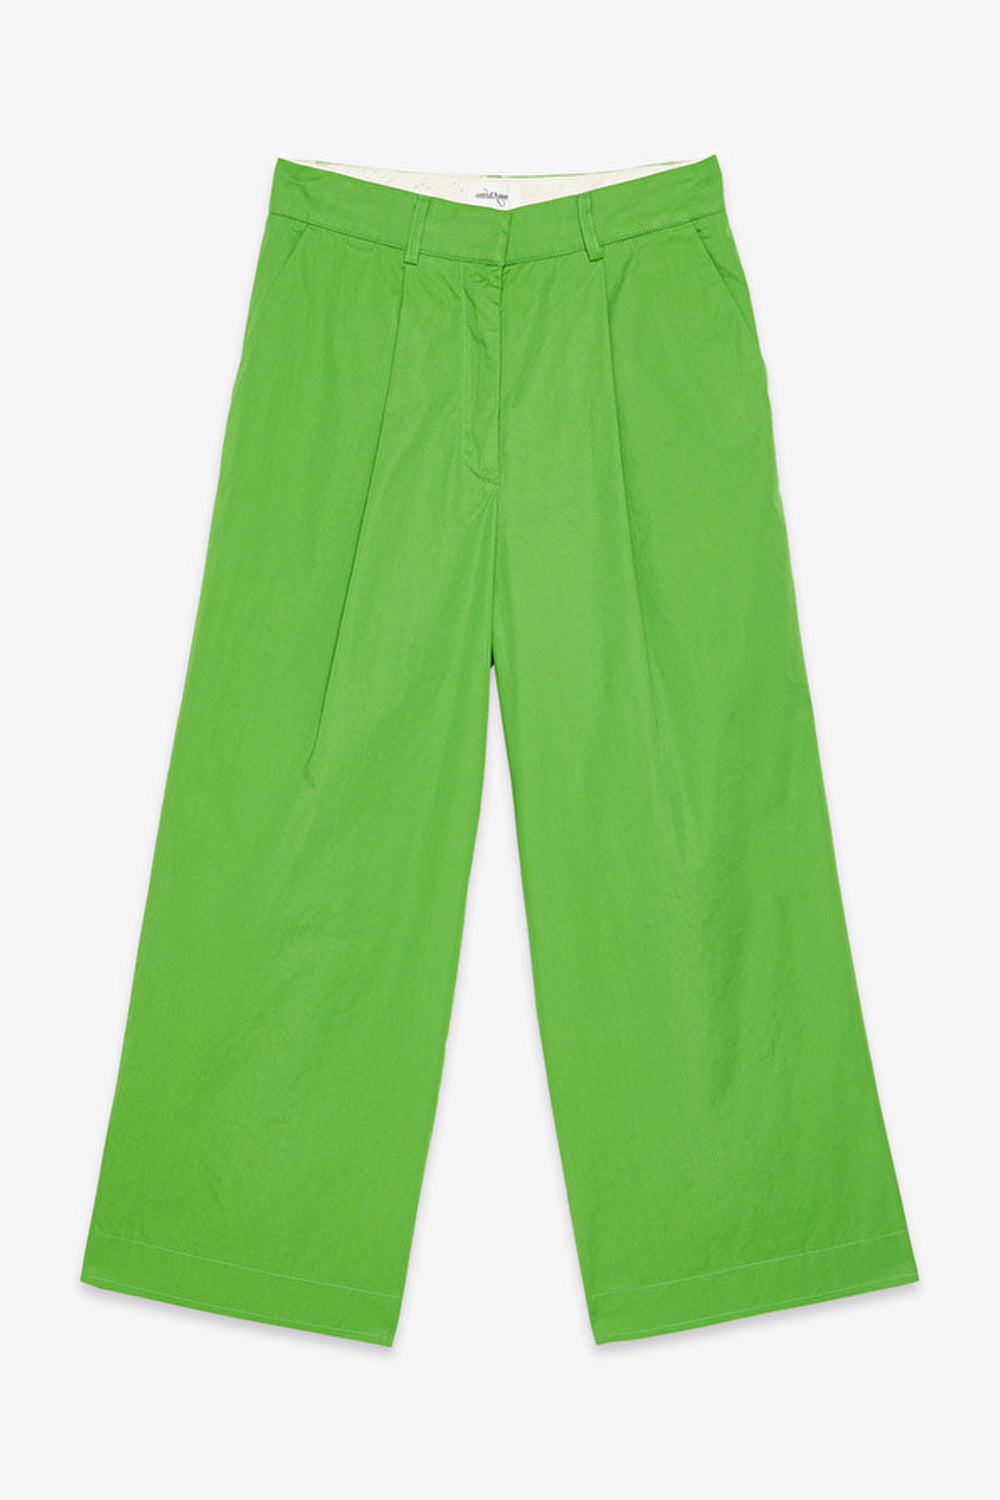 ottodame-DP8559-green-cropped-pant